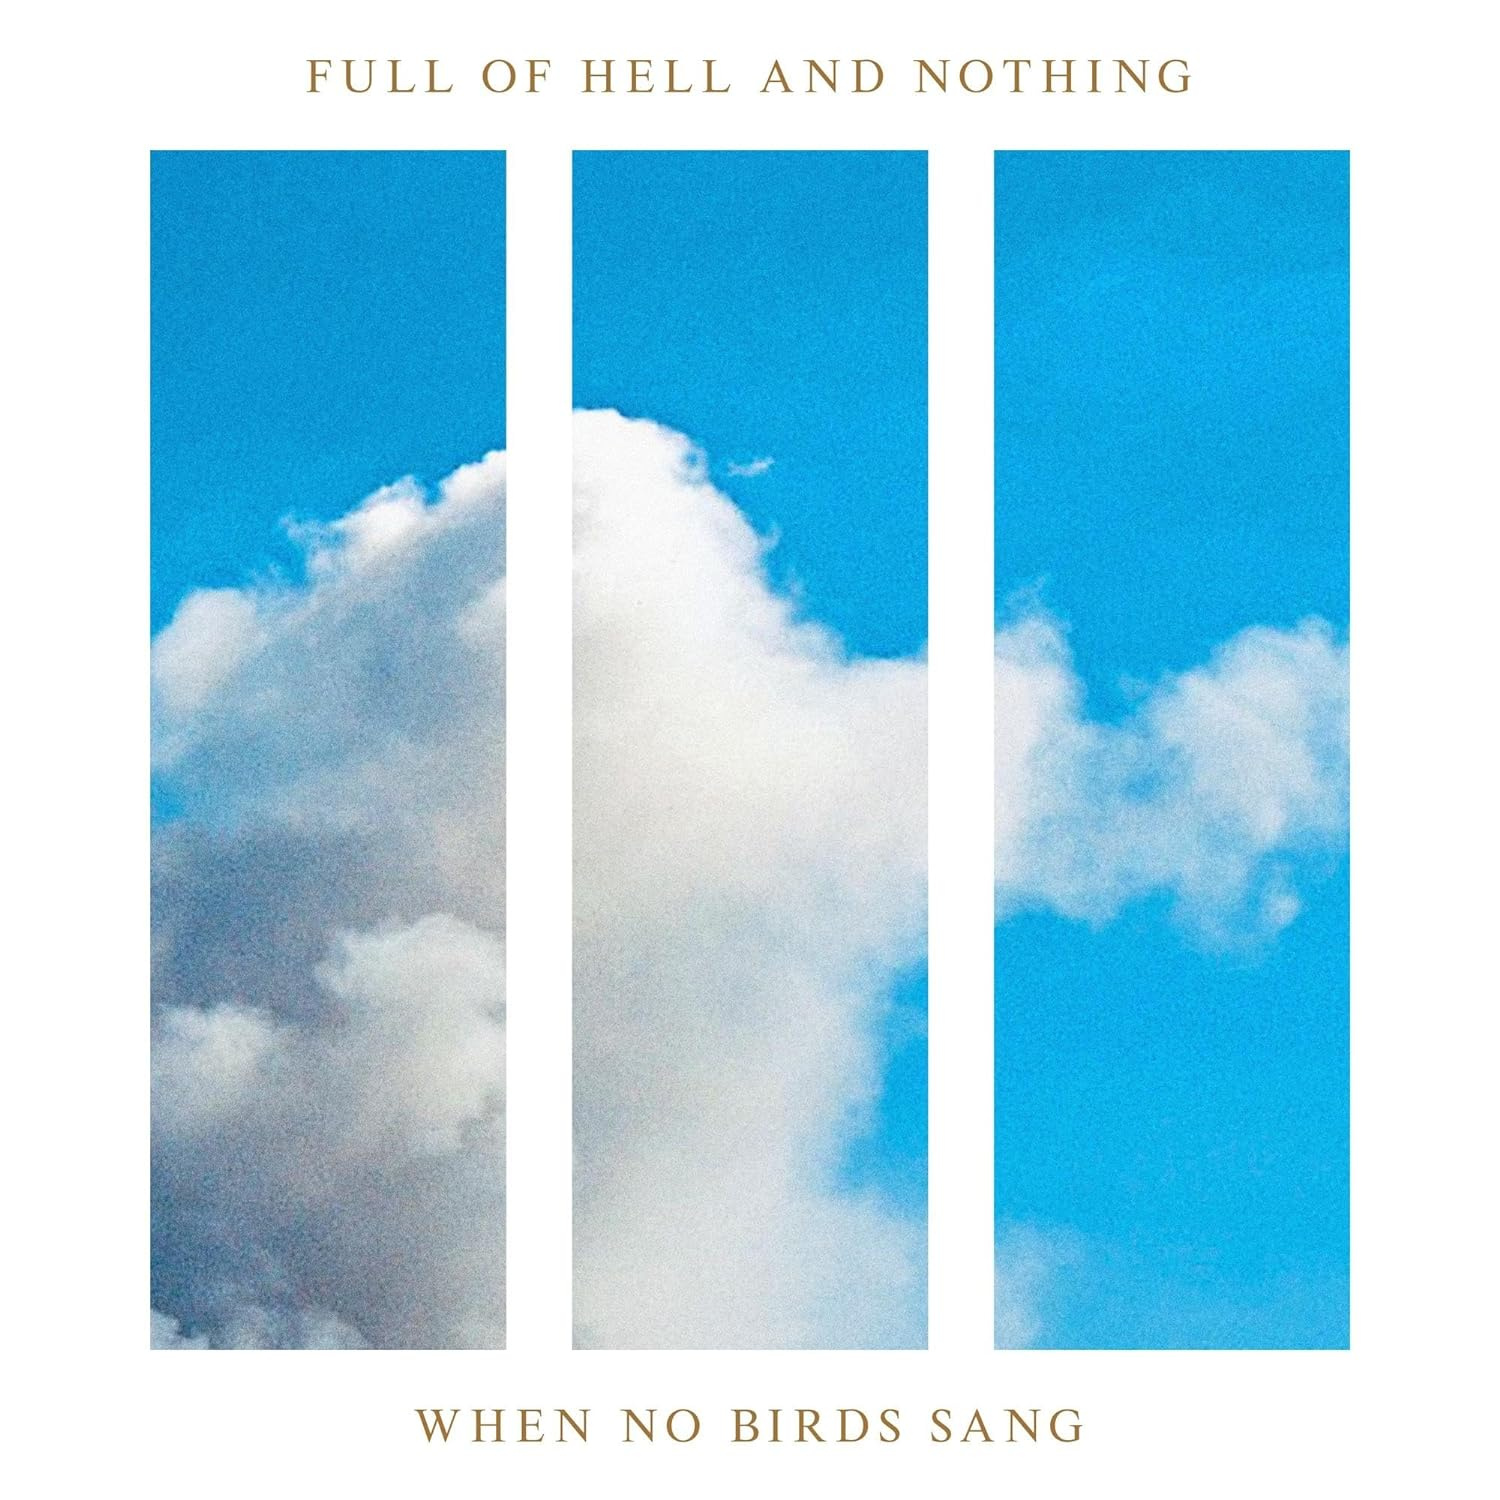 Full of Hell and Nothing - When No Birds Sang vinyl cover